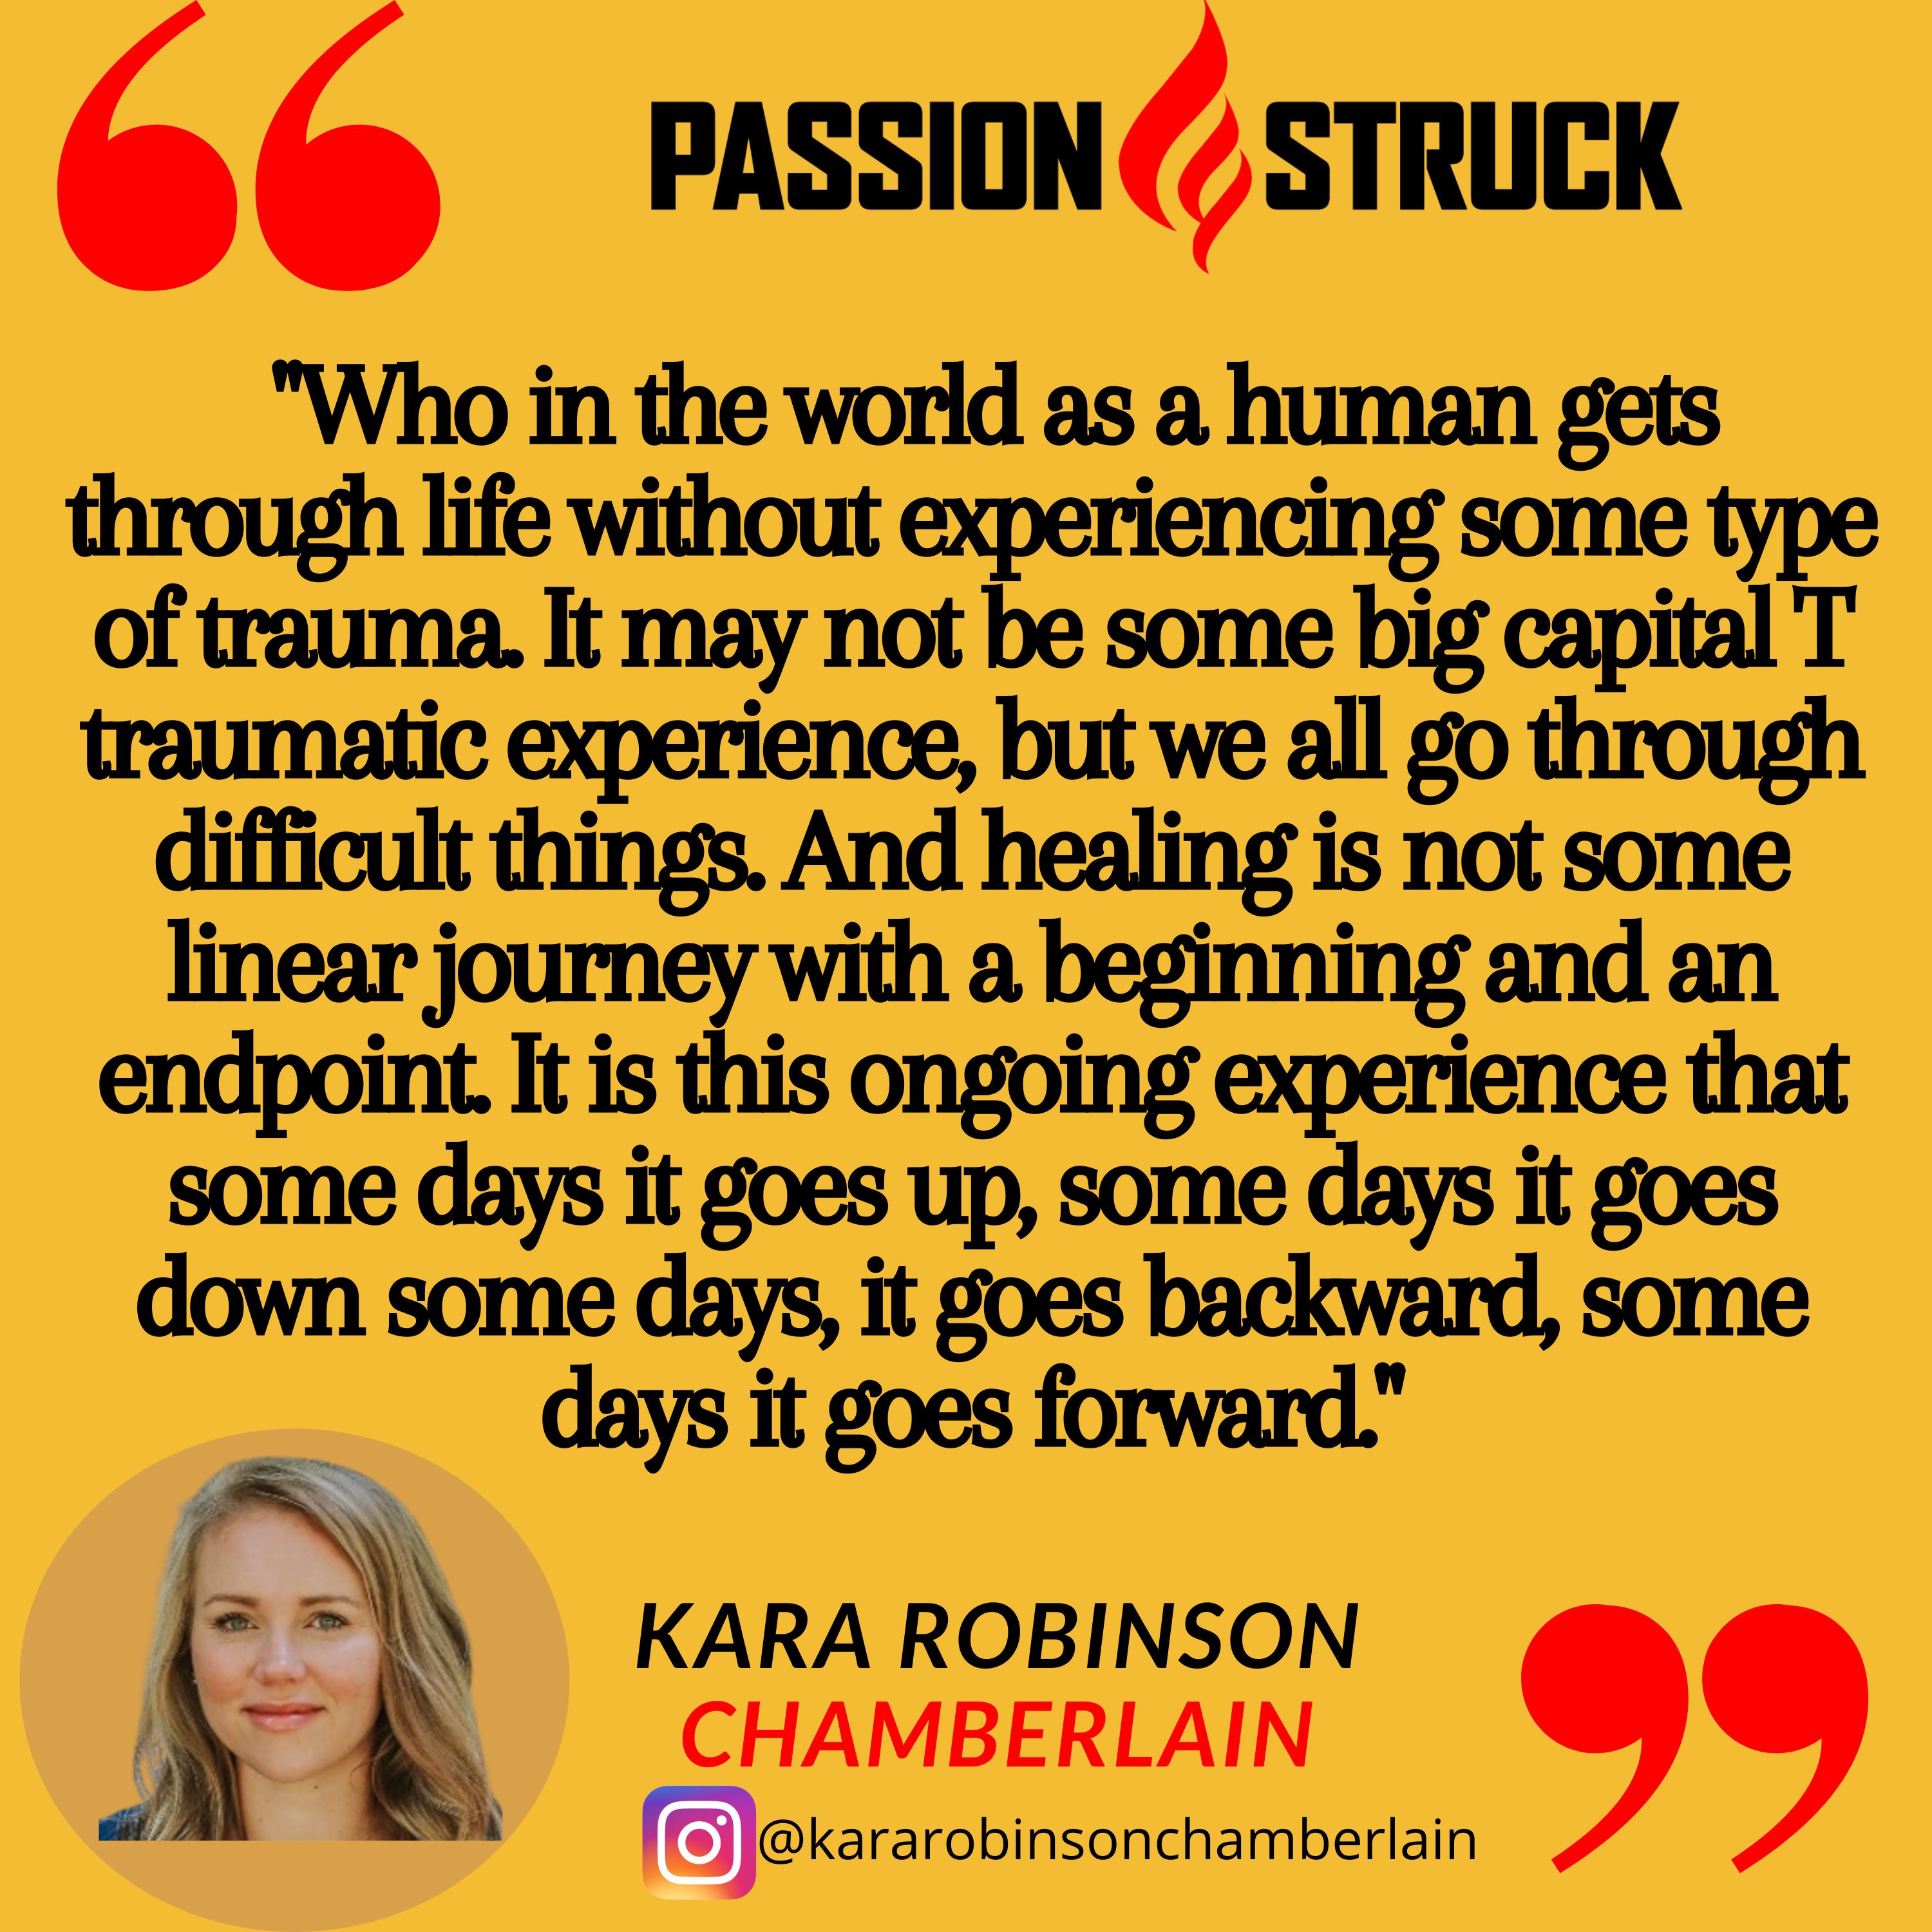 Quote by Kara Robinson Chamberlain from the Passion Struck podcast:   "Who in the world as a human gets through life without experiencing some type of trauma. It may not be some big capital T traumatic experience, but we all go through difficult things. And healing is not some linear journey with a beginning and an endpoint. It is this ongoing experience that some days it goes up, some days it goes down some days, it goes backward, some days it goes forward."